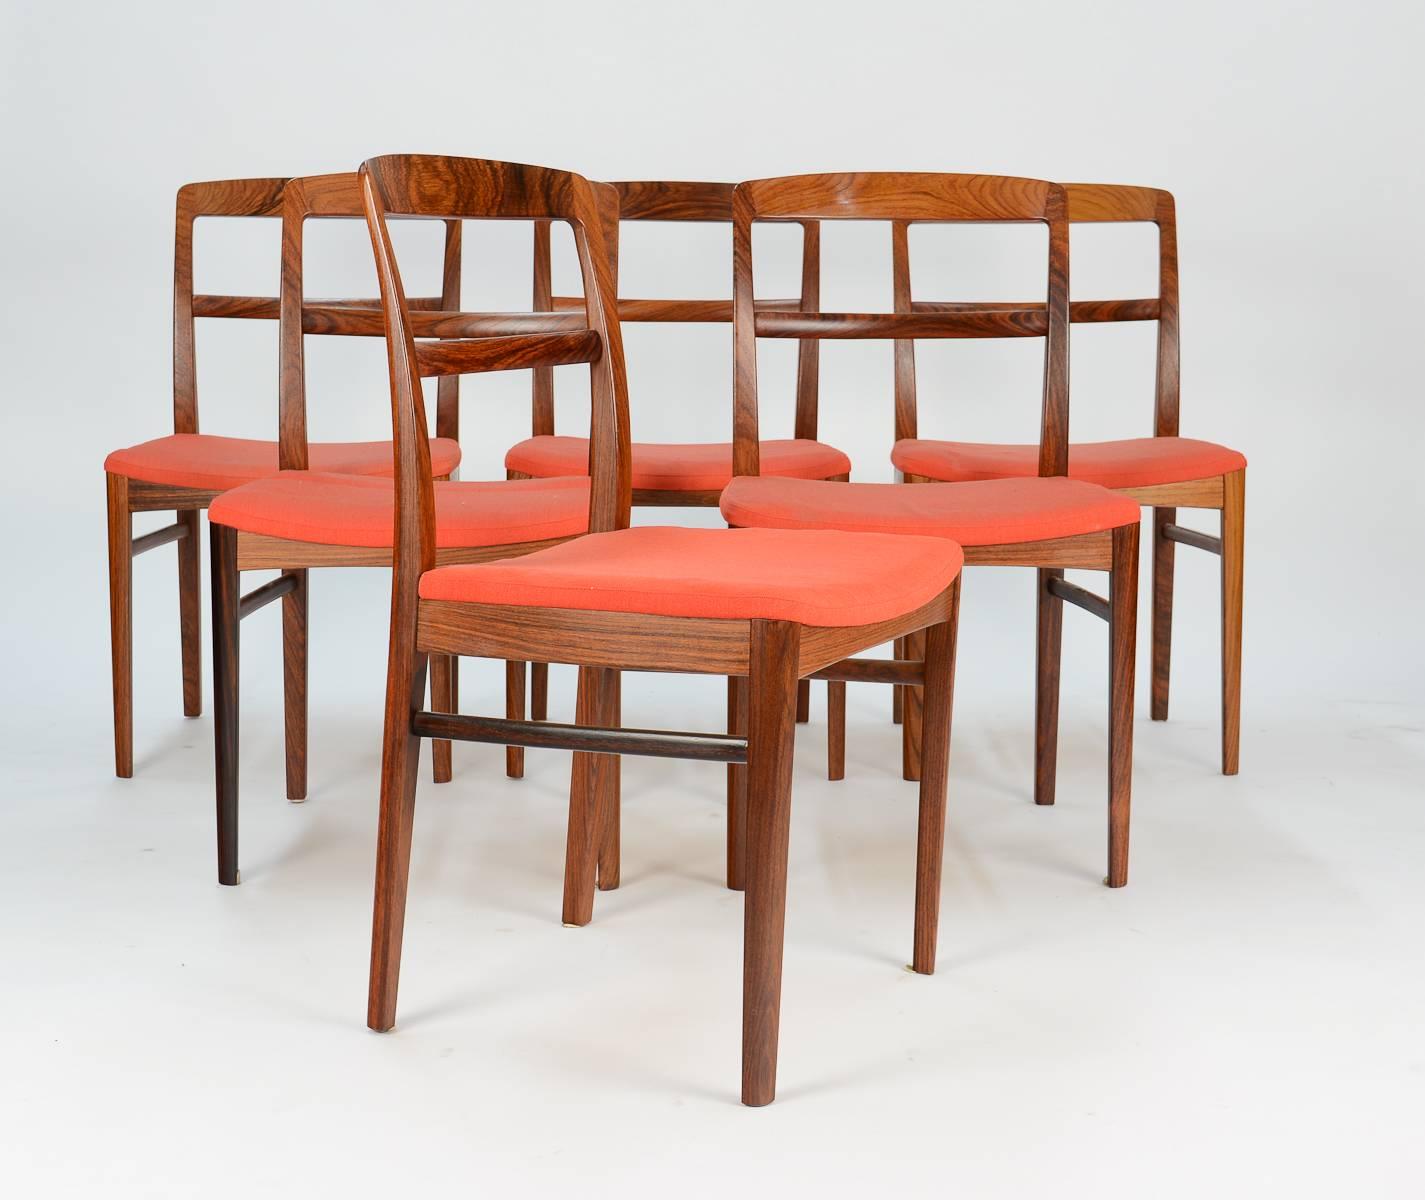 A distinctive set of six Danish rosewood dining chairs with dramatic red cushions. A supreme example of Vodder's simple grace that makes for enduring and highly sought-after design. Manufacturer Sibast Mobler's execution demonstrates fine